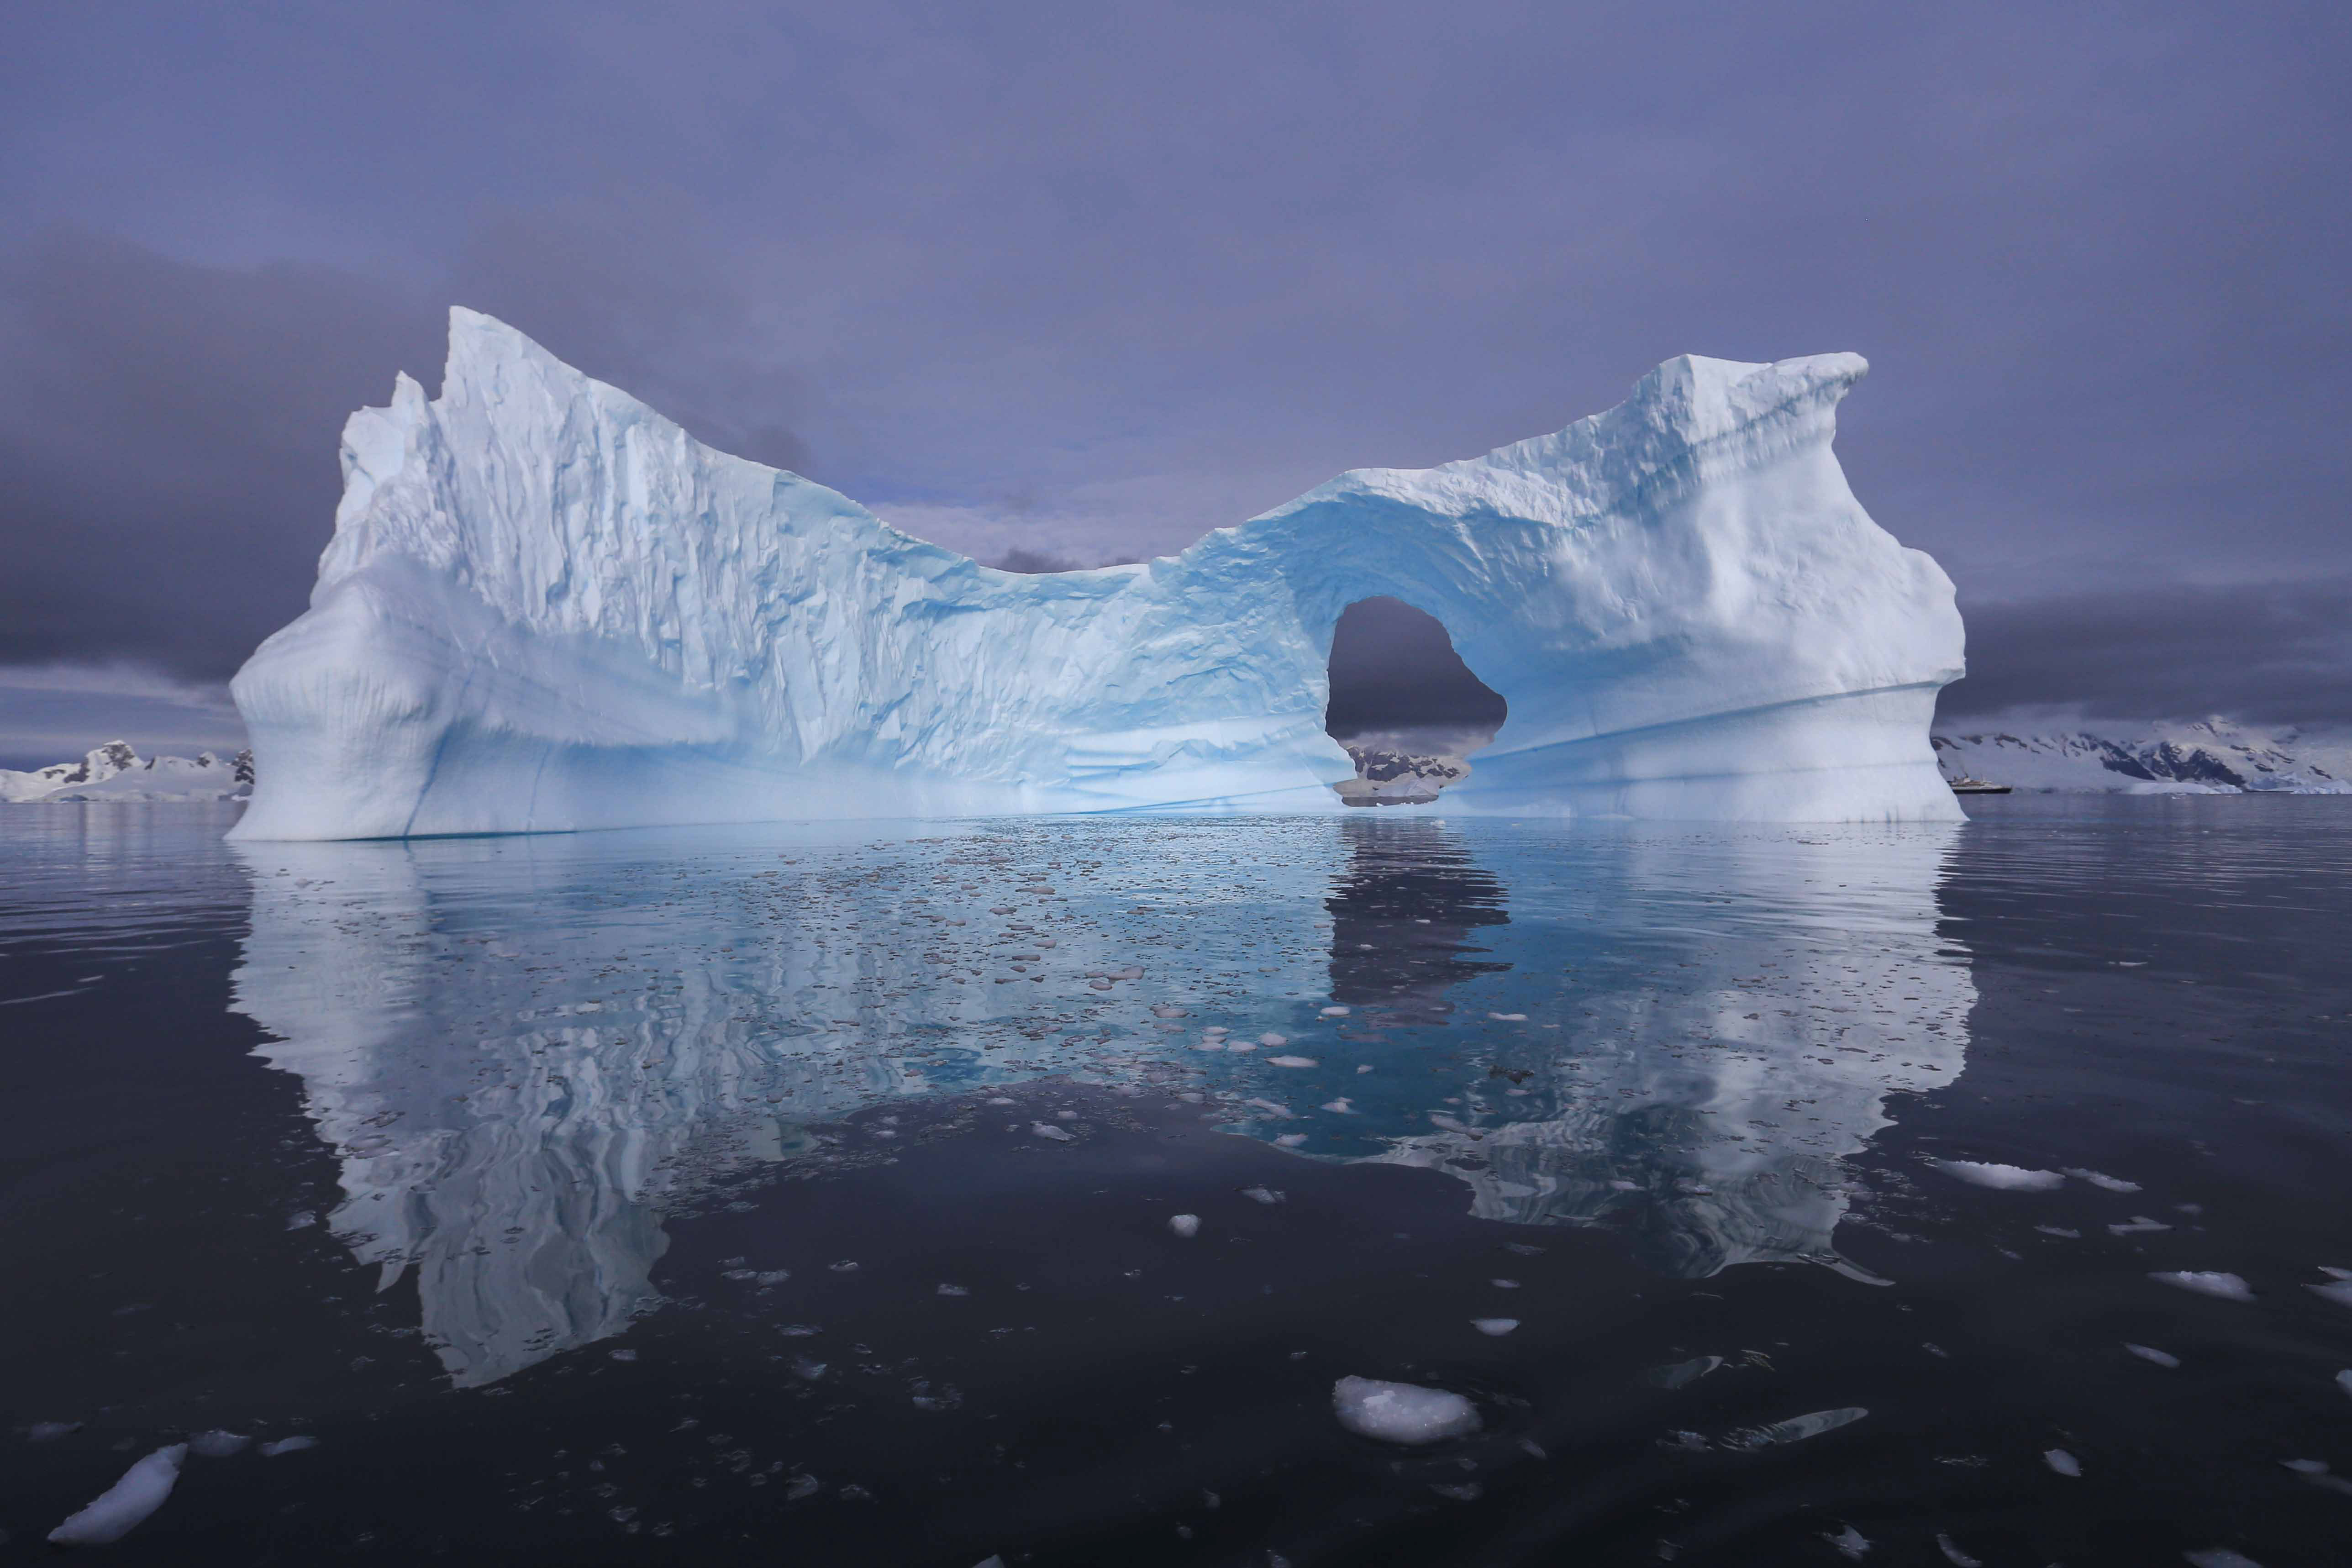 Icebergs,  in all shapes, sizes and colors, are photographic highlights during polar voyages to the Antarctic